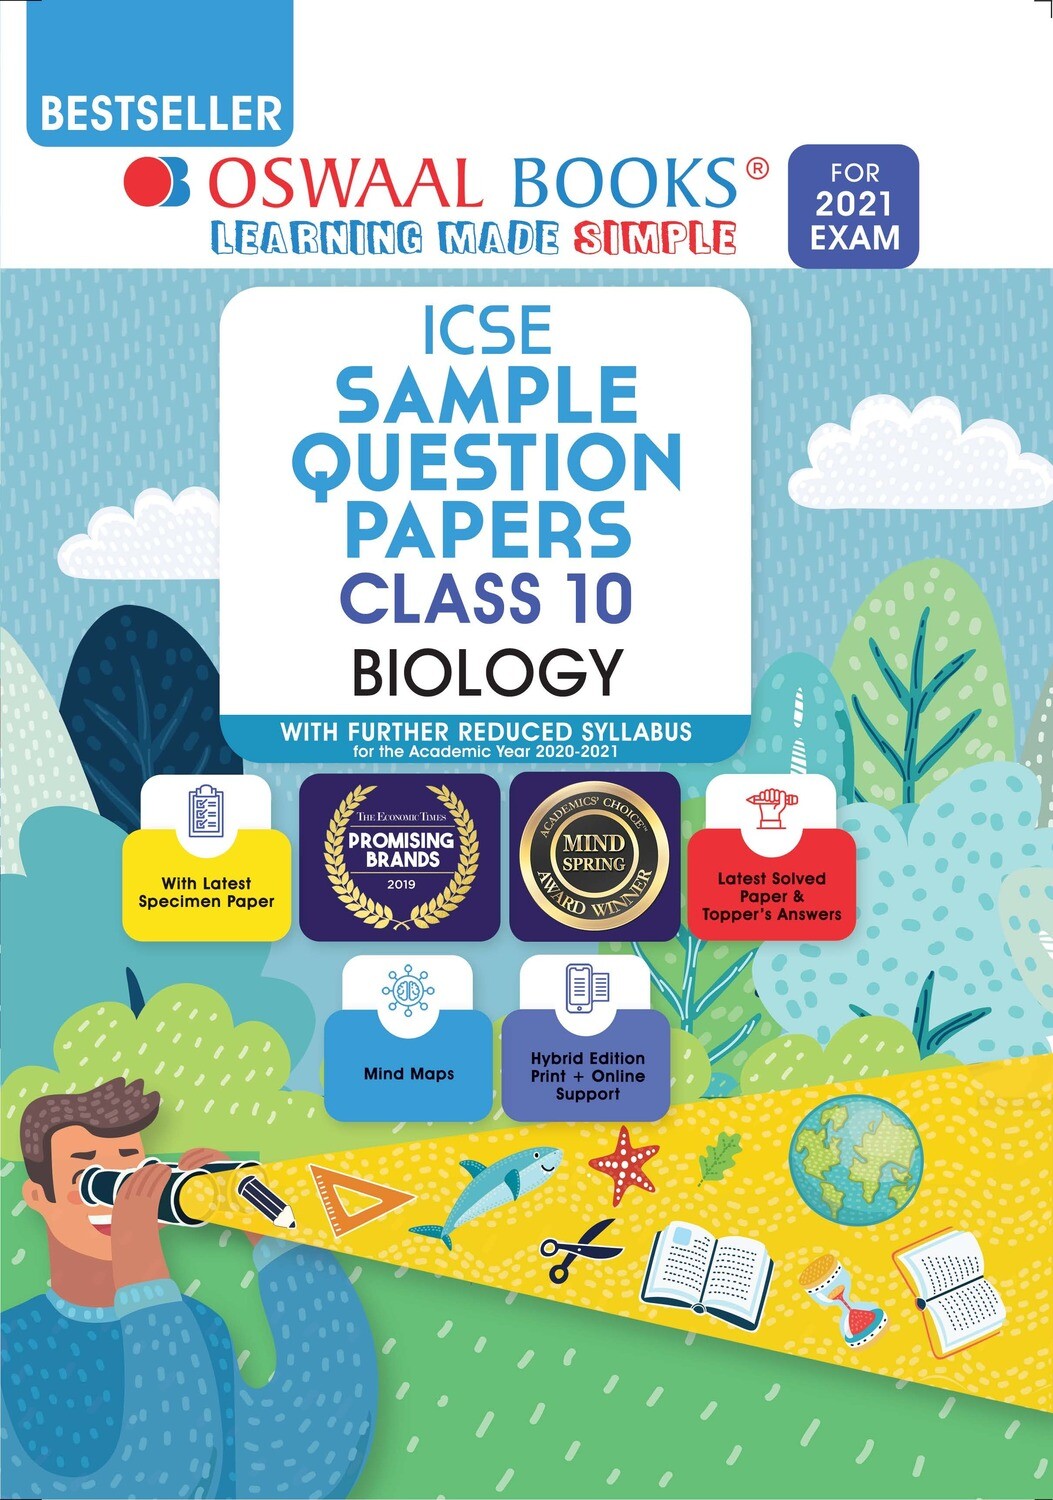 Buy e-book: Oswaal ICSE Sample Question Papers Class 10 Biology (Reduced Syllabus for 2021 Exam): 9789354231810